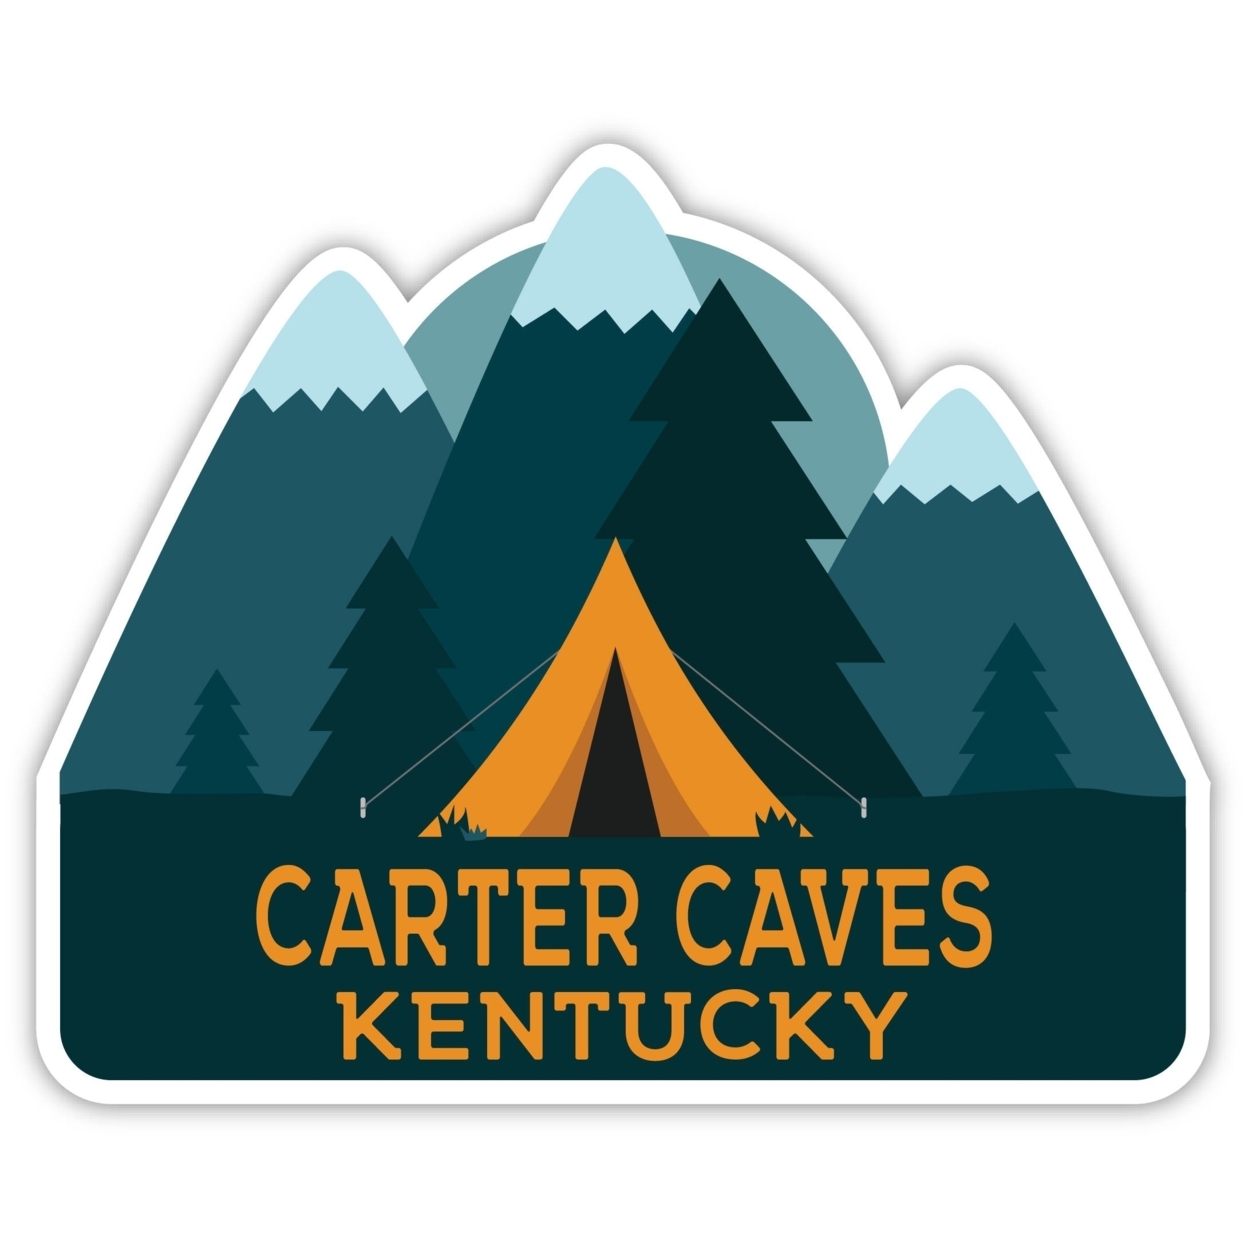 Carter Caves Kentucky Souvenir Decorative Stickers (Choose Theme And Size) - 4-Pack, 8-Inch, Tent